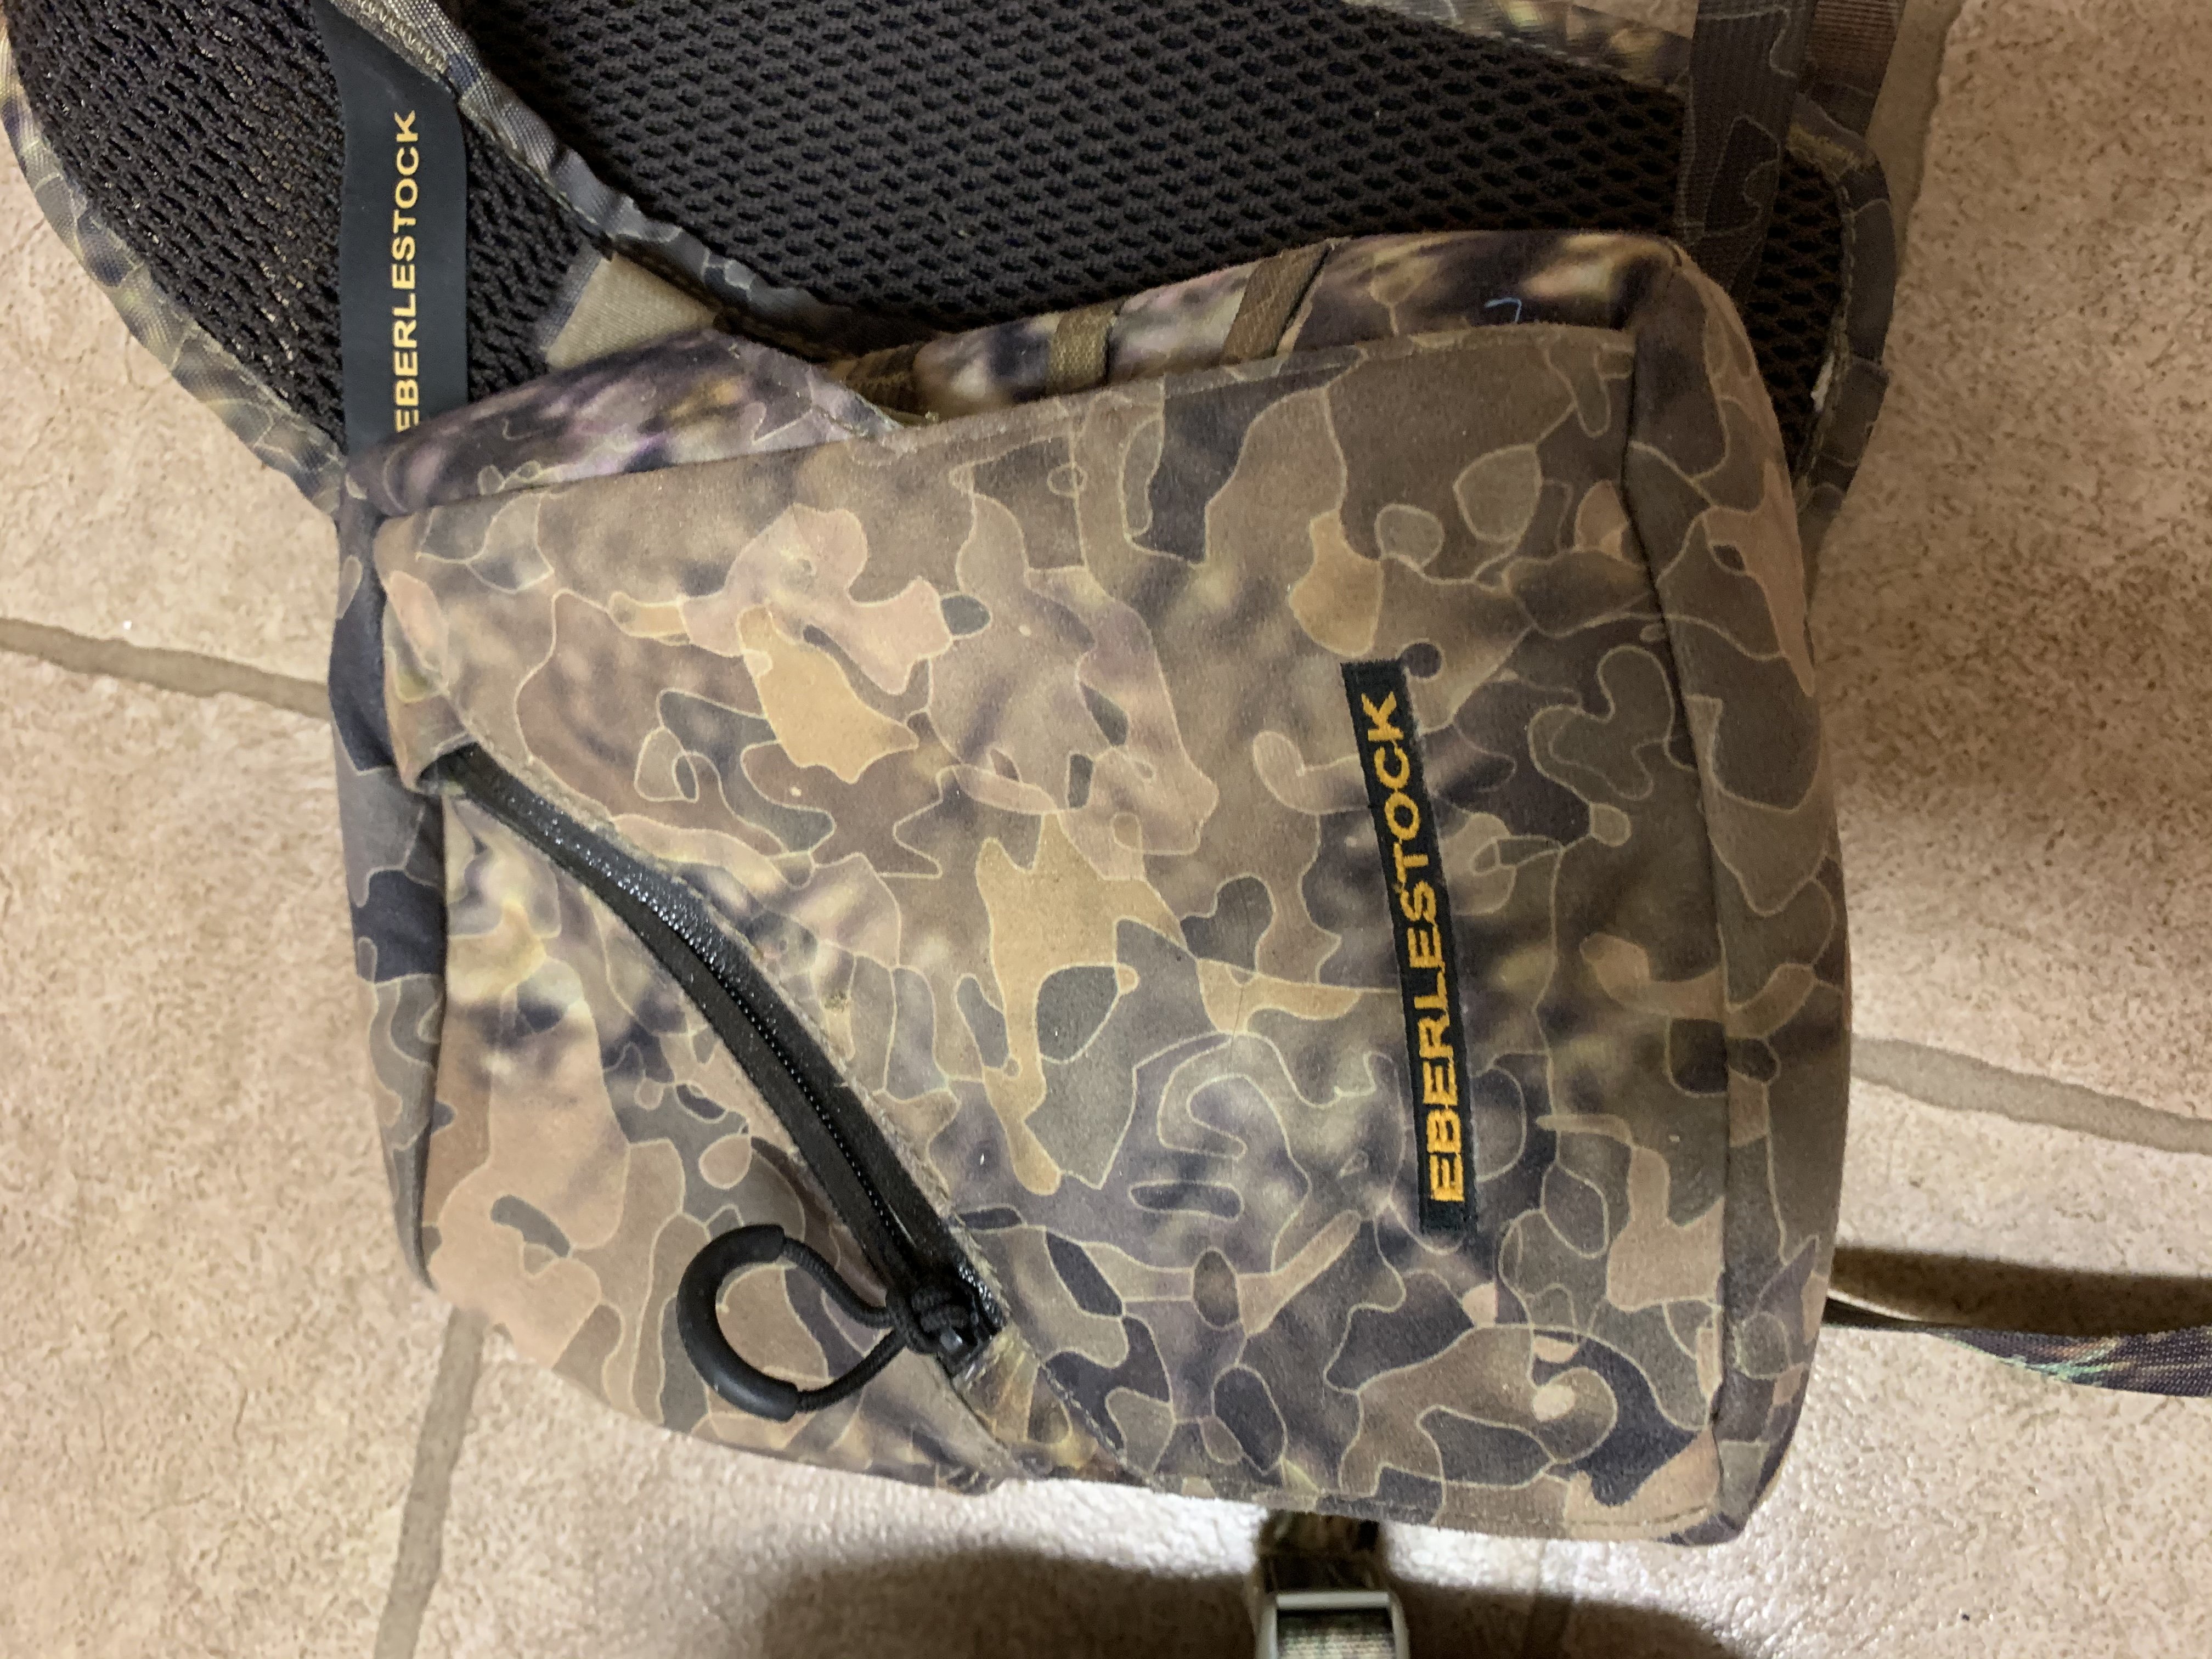 Eberlestock and Badlands bino pouches - Classified Ads - CouesWhitetail ...